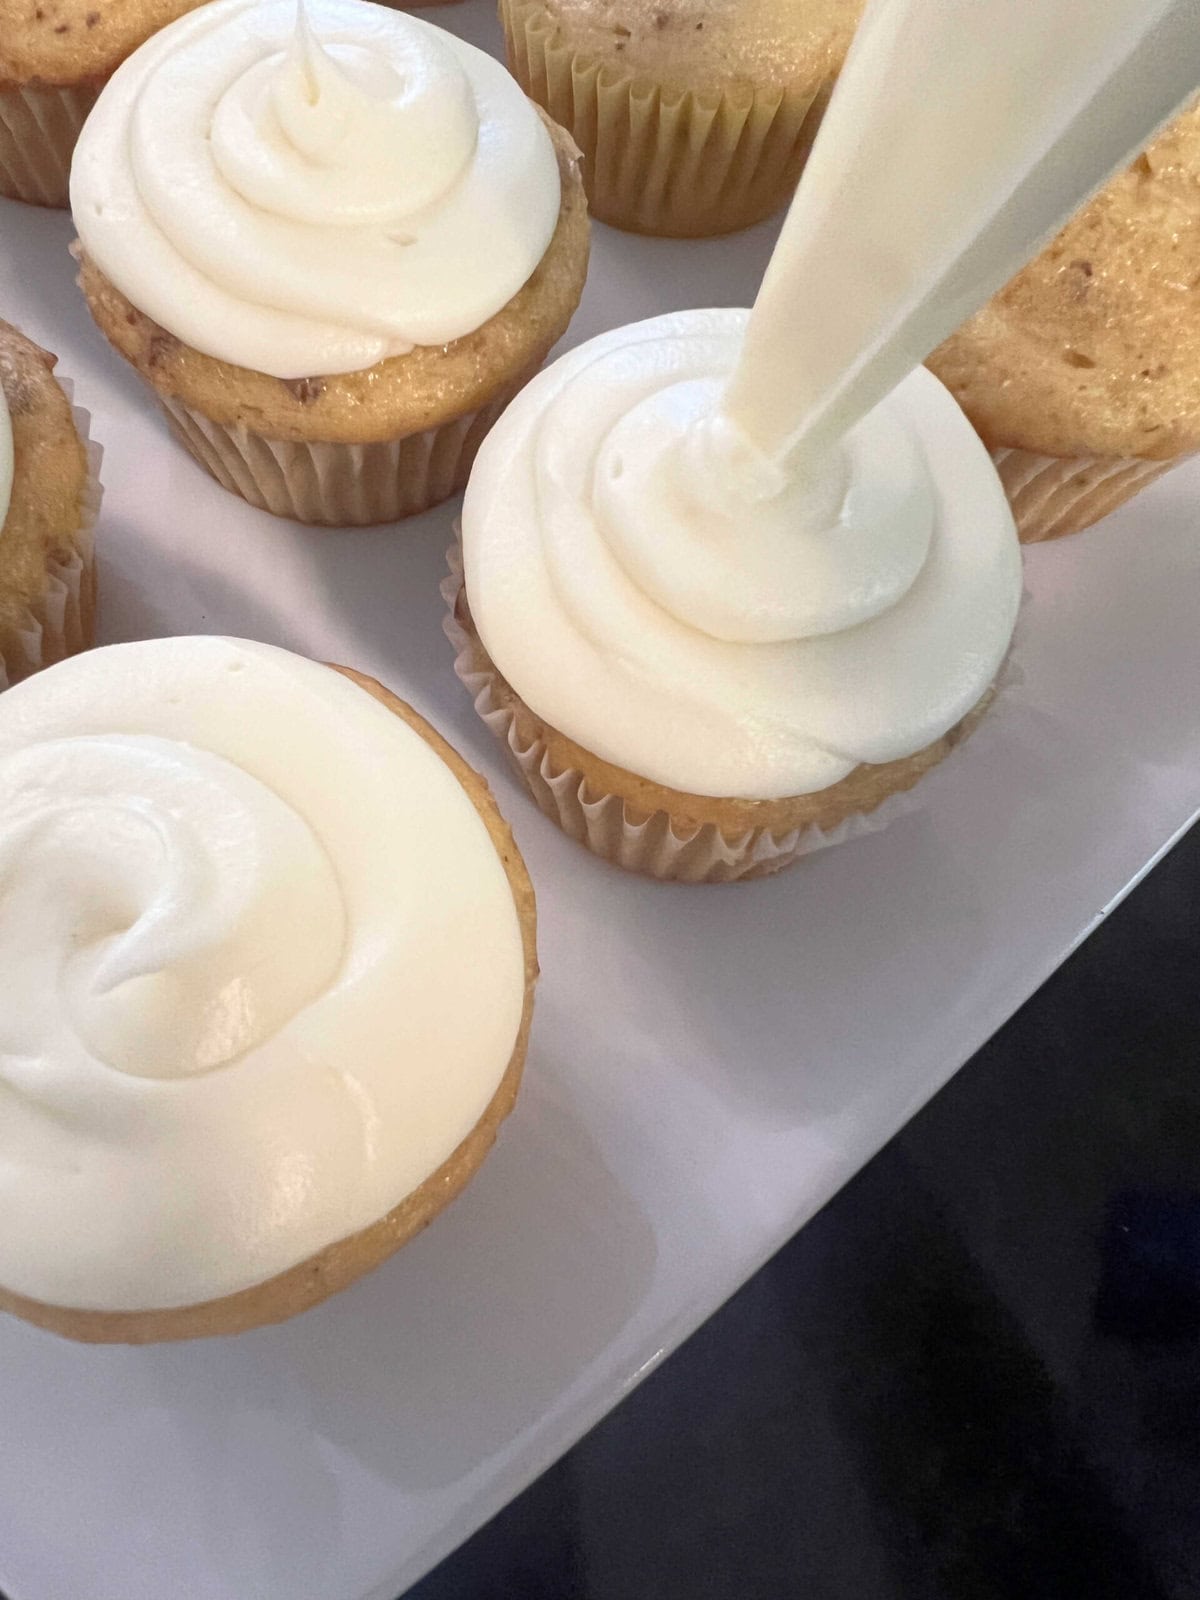 Piping swirls of cream cheese frosting onto the cupcakes.